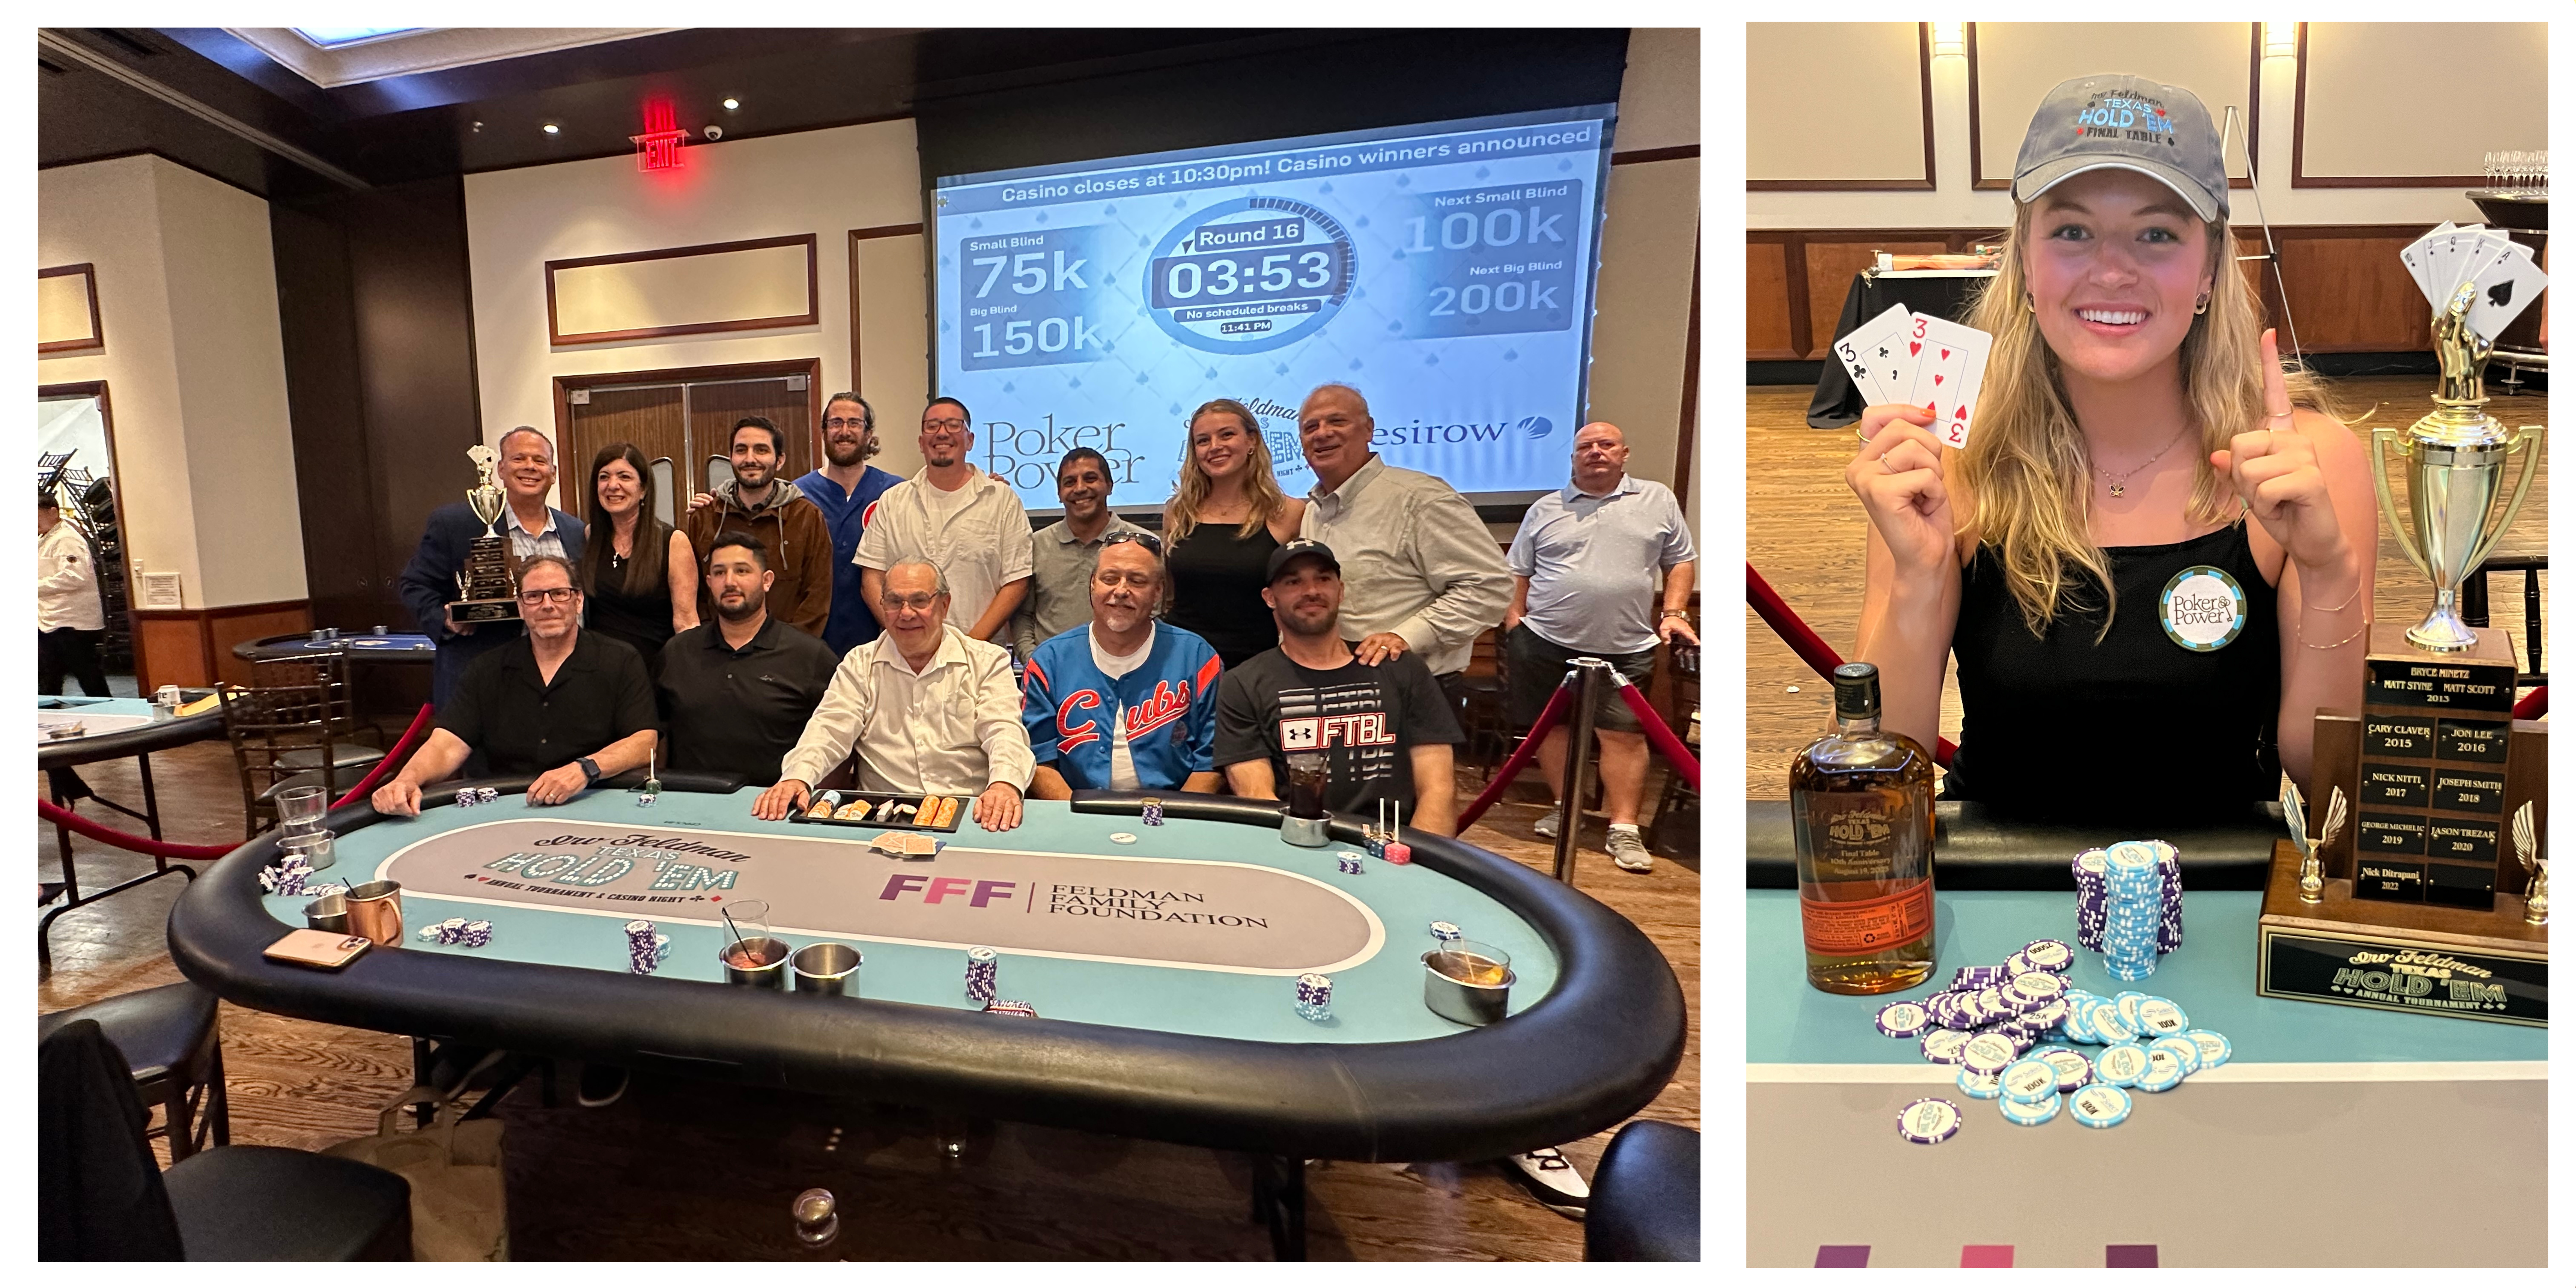 Congratulations to “AbbyPoker” – Our 1st Place Winner at the 10th Annual Irv Feldman Poker Tournament